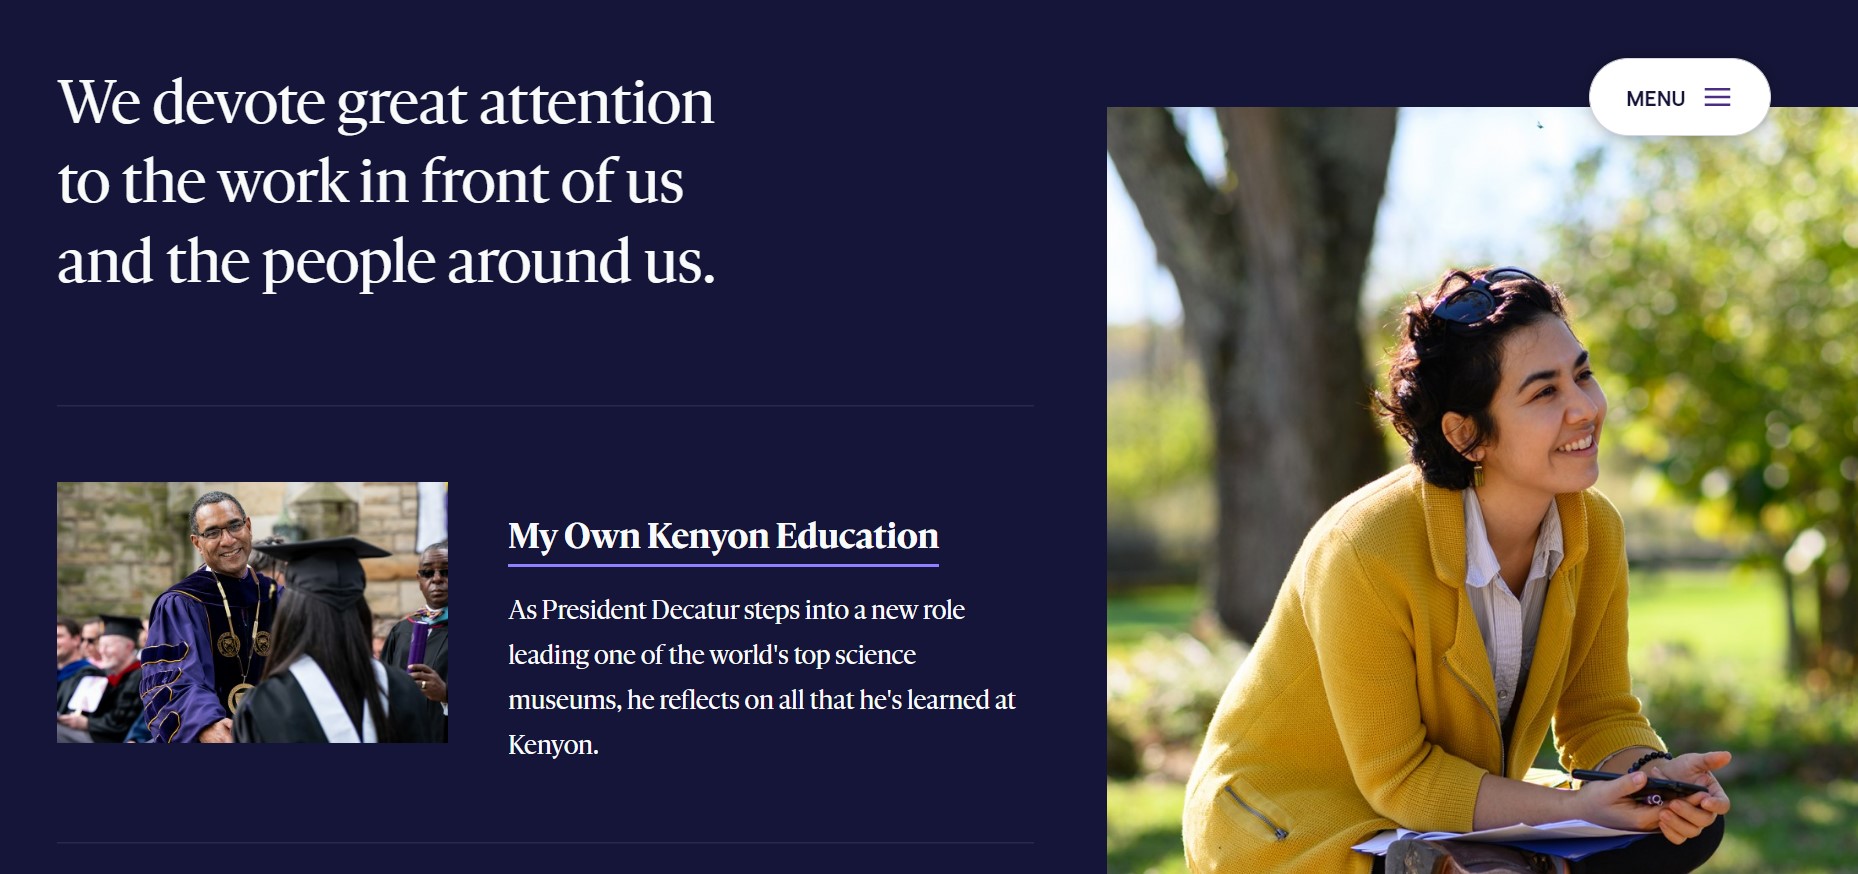 Kenyon College’s website is minimalist, with an easy easy-to-navigate layout and a concise sidebar menu.